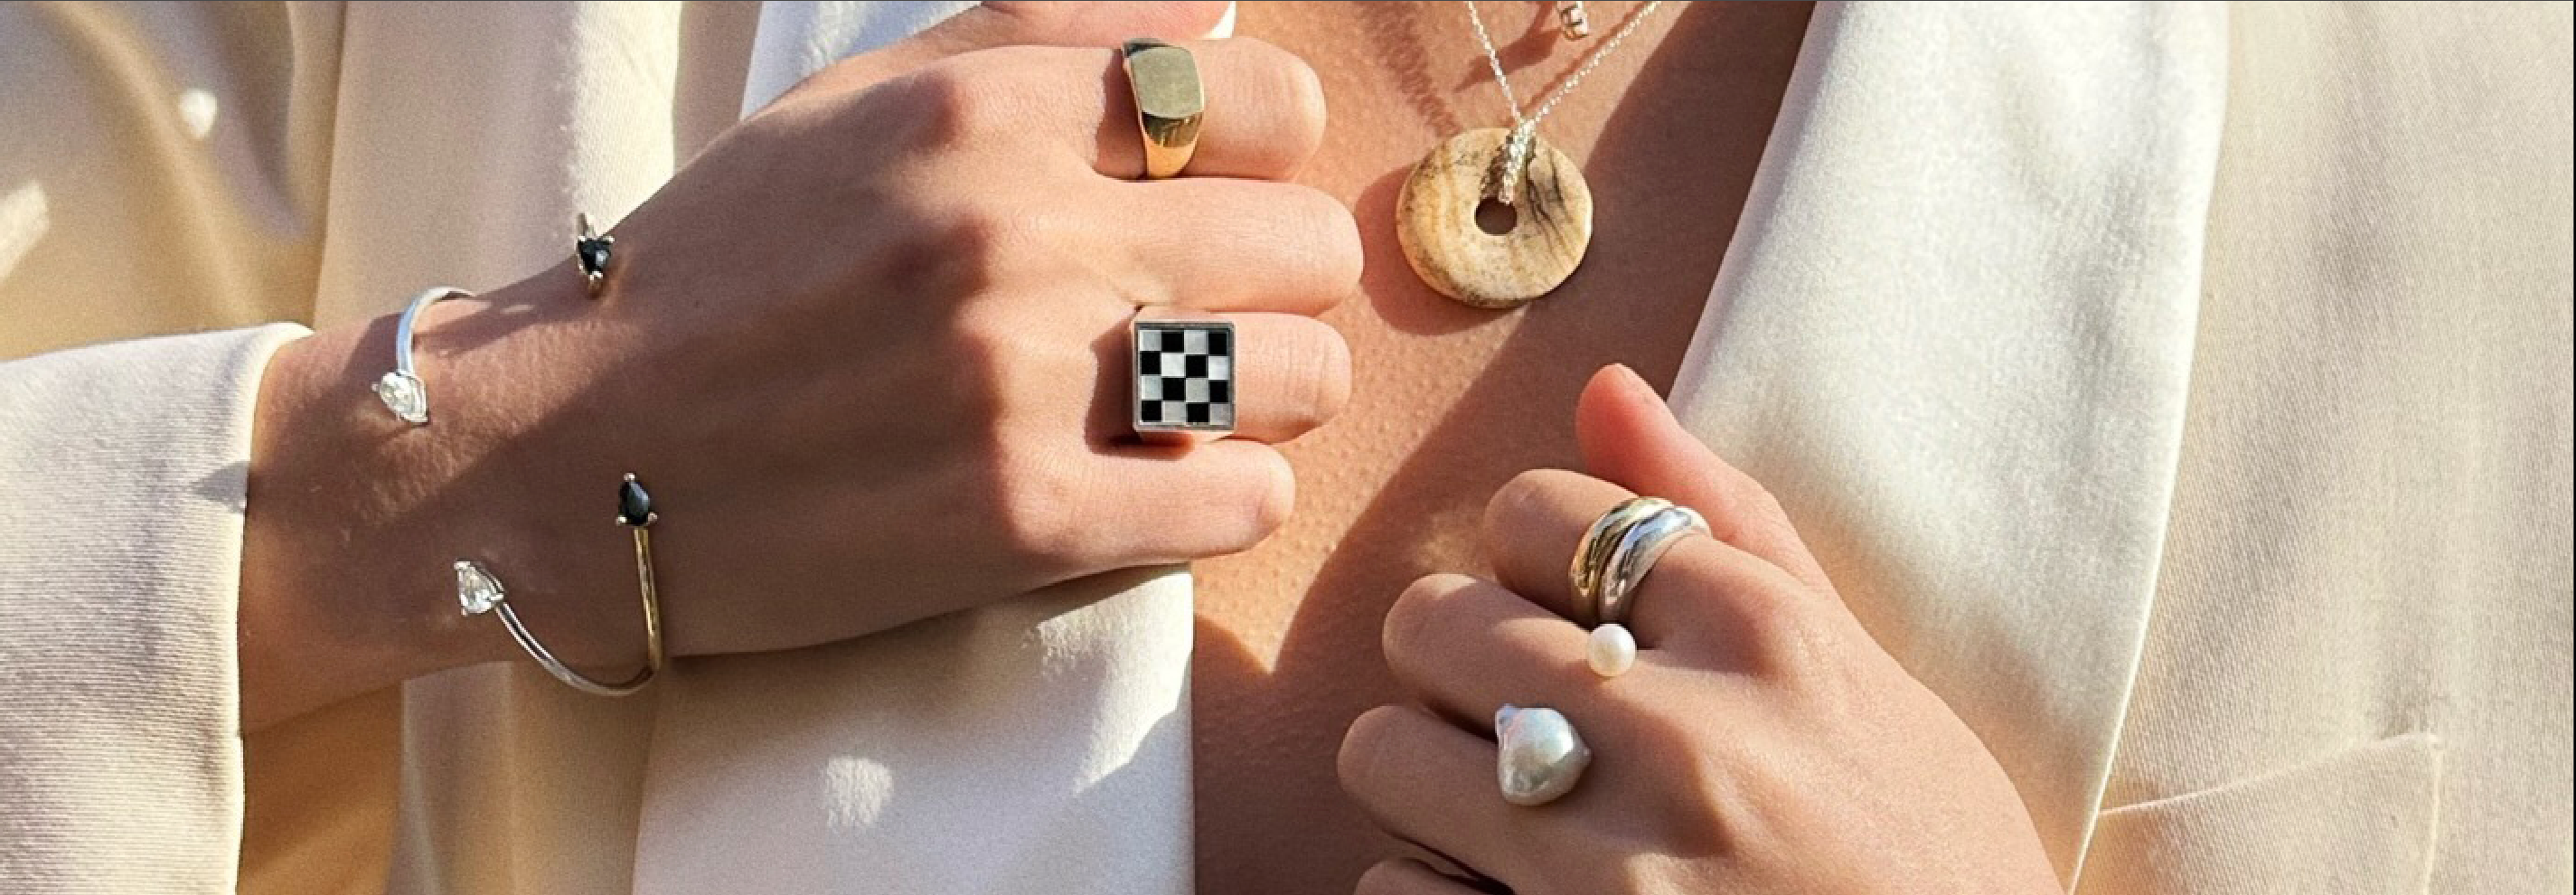 Mother of Pearl Ring - Rae